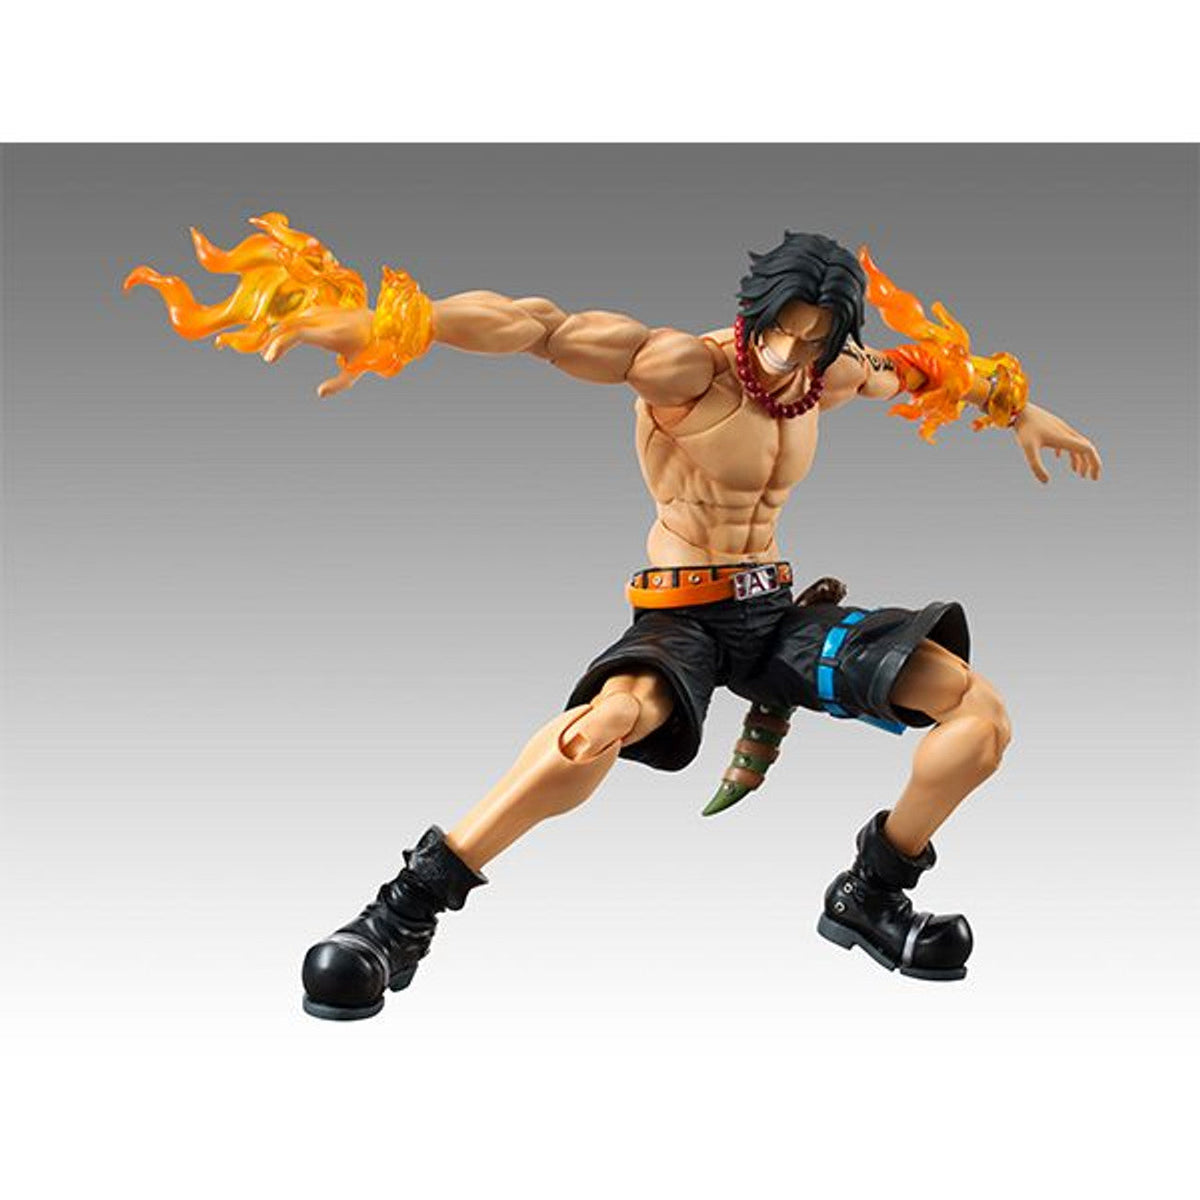 Variable Action Heroes One Piece &quot;Portgas D. Ace&quot;-MegaHouse-Ace Cards &amp; Collectibles